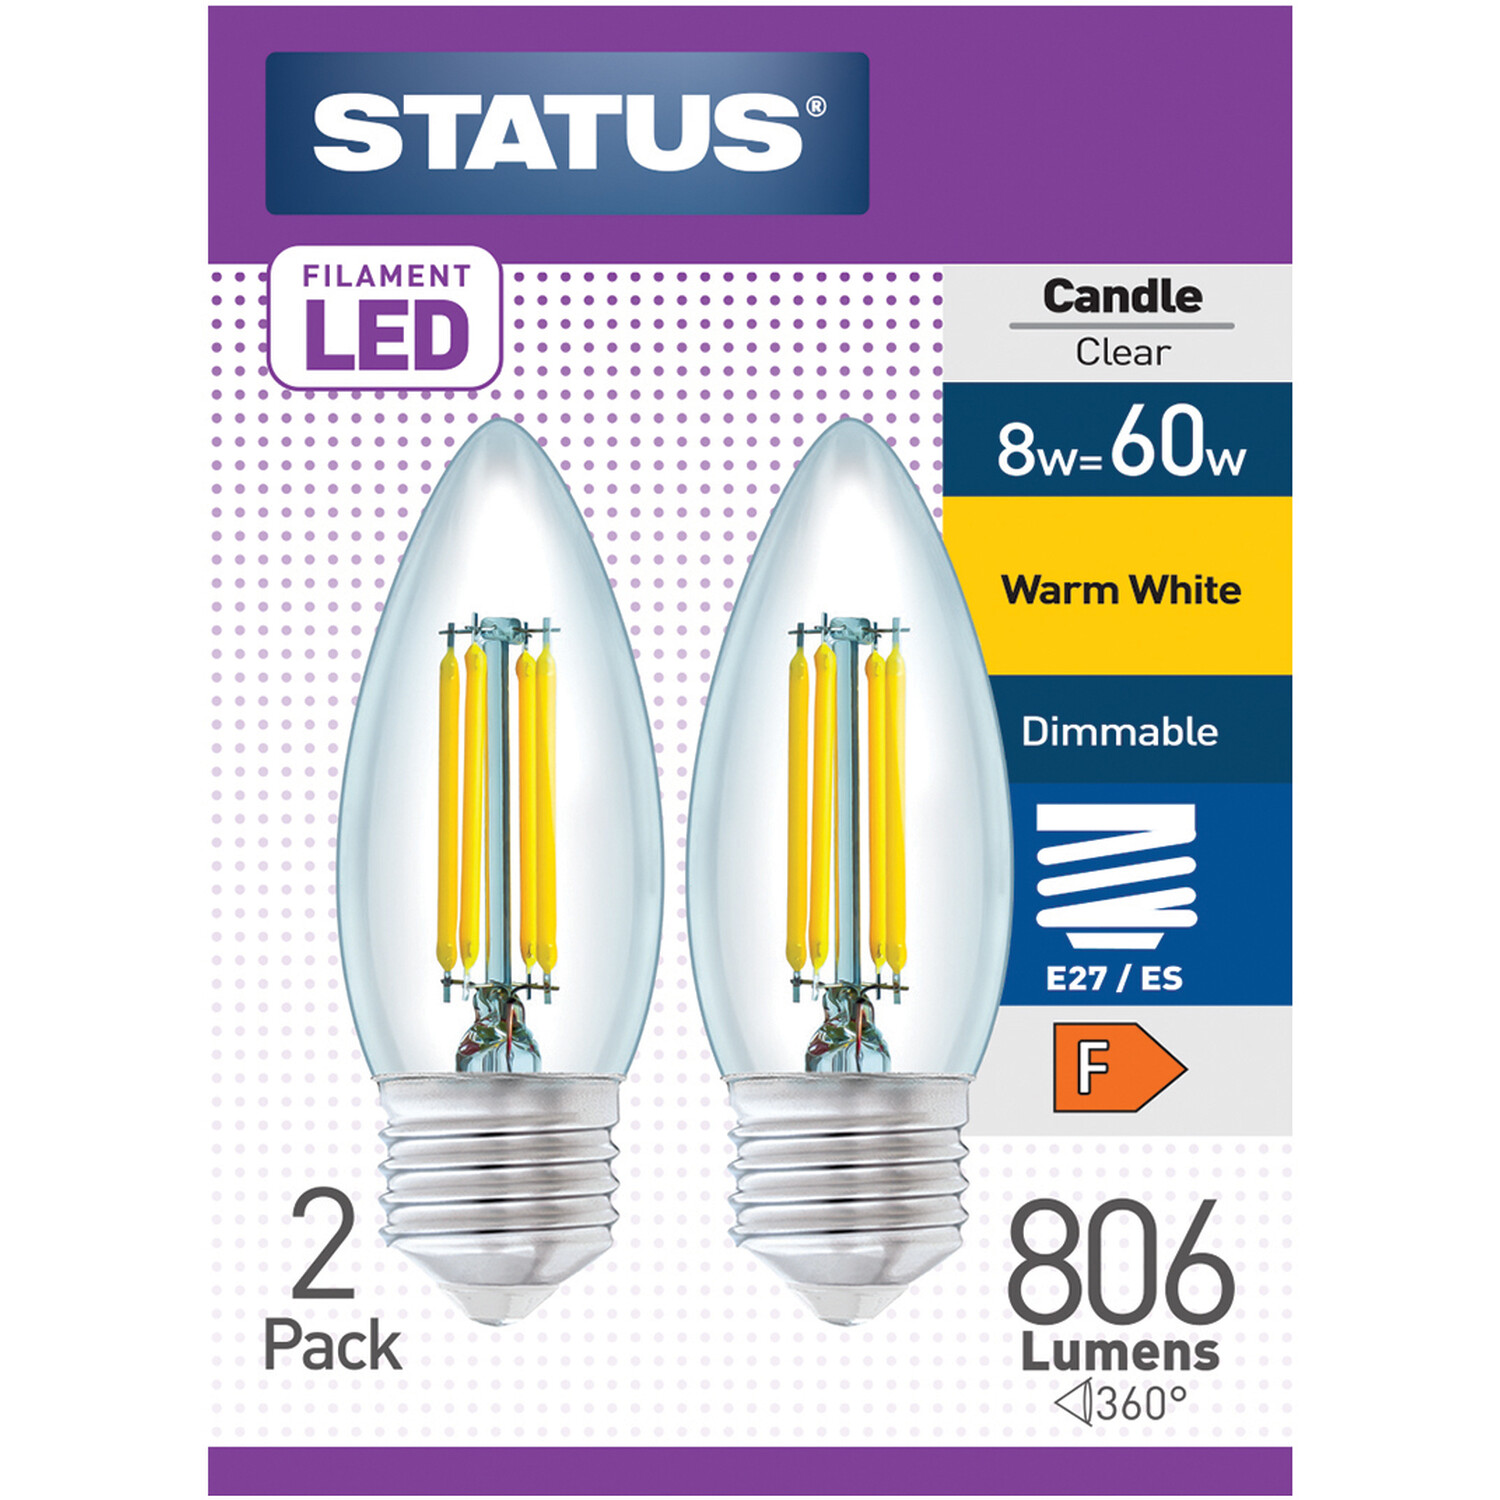 Pack of 2 Status Filament LED Dimmable Clear Candle Bulbs Image 1